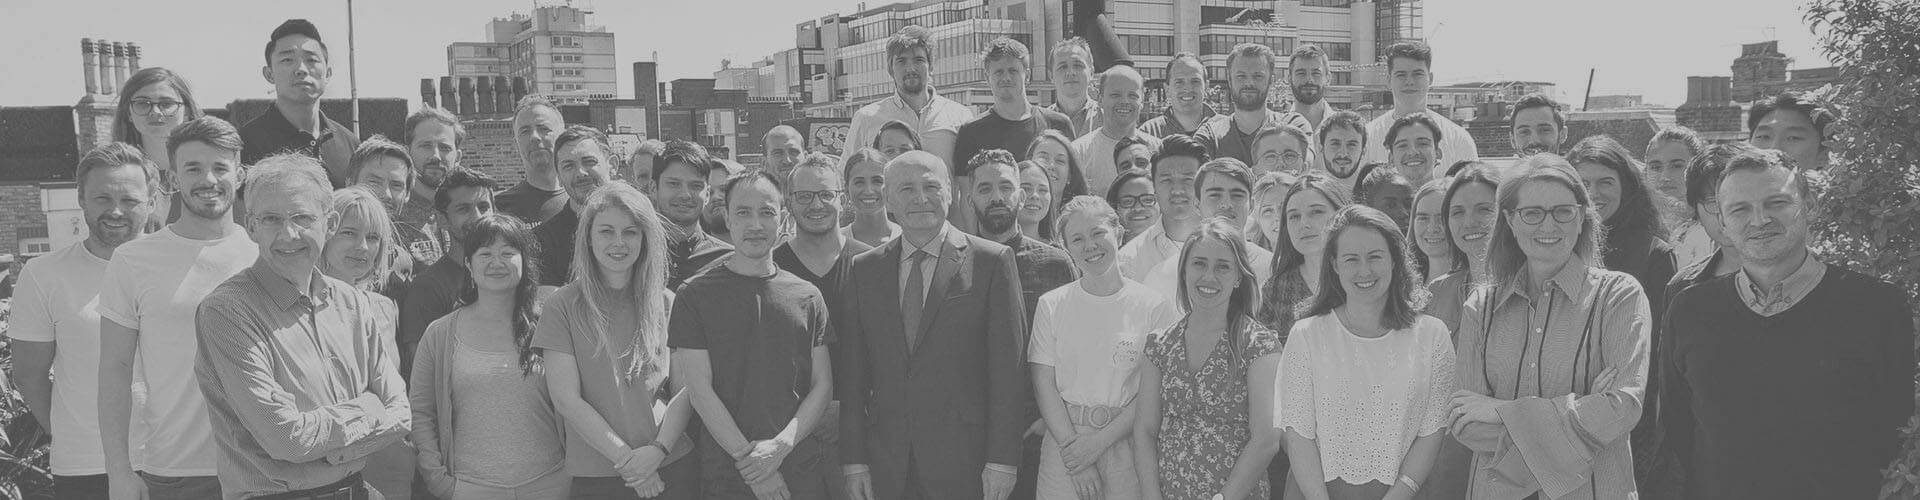 The PriestmanGoode team on the rooftop of the studio's London headquarters